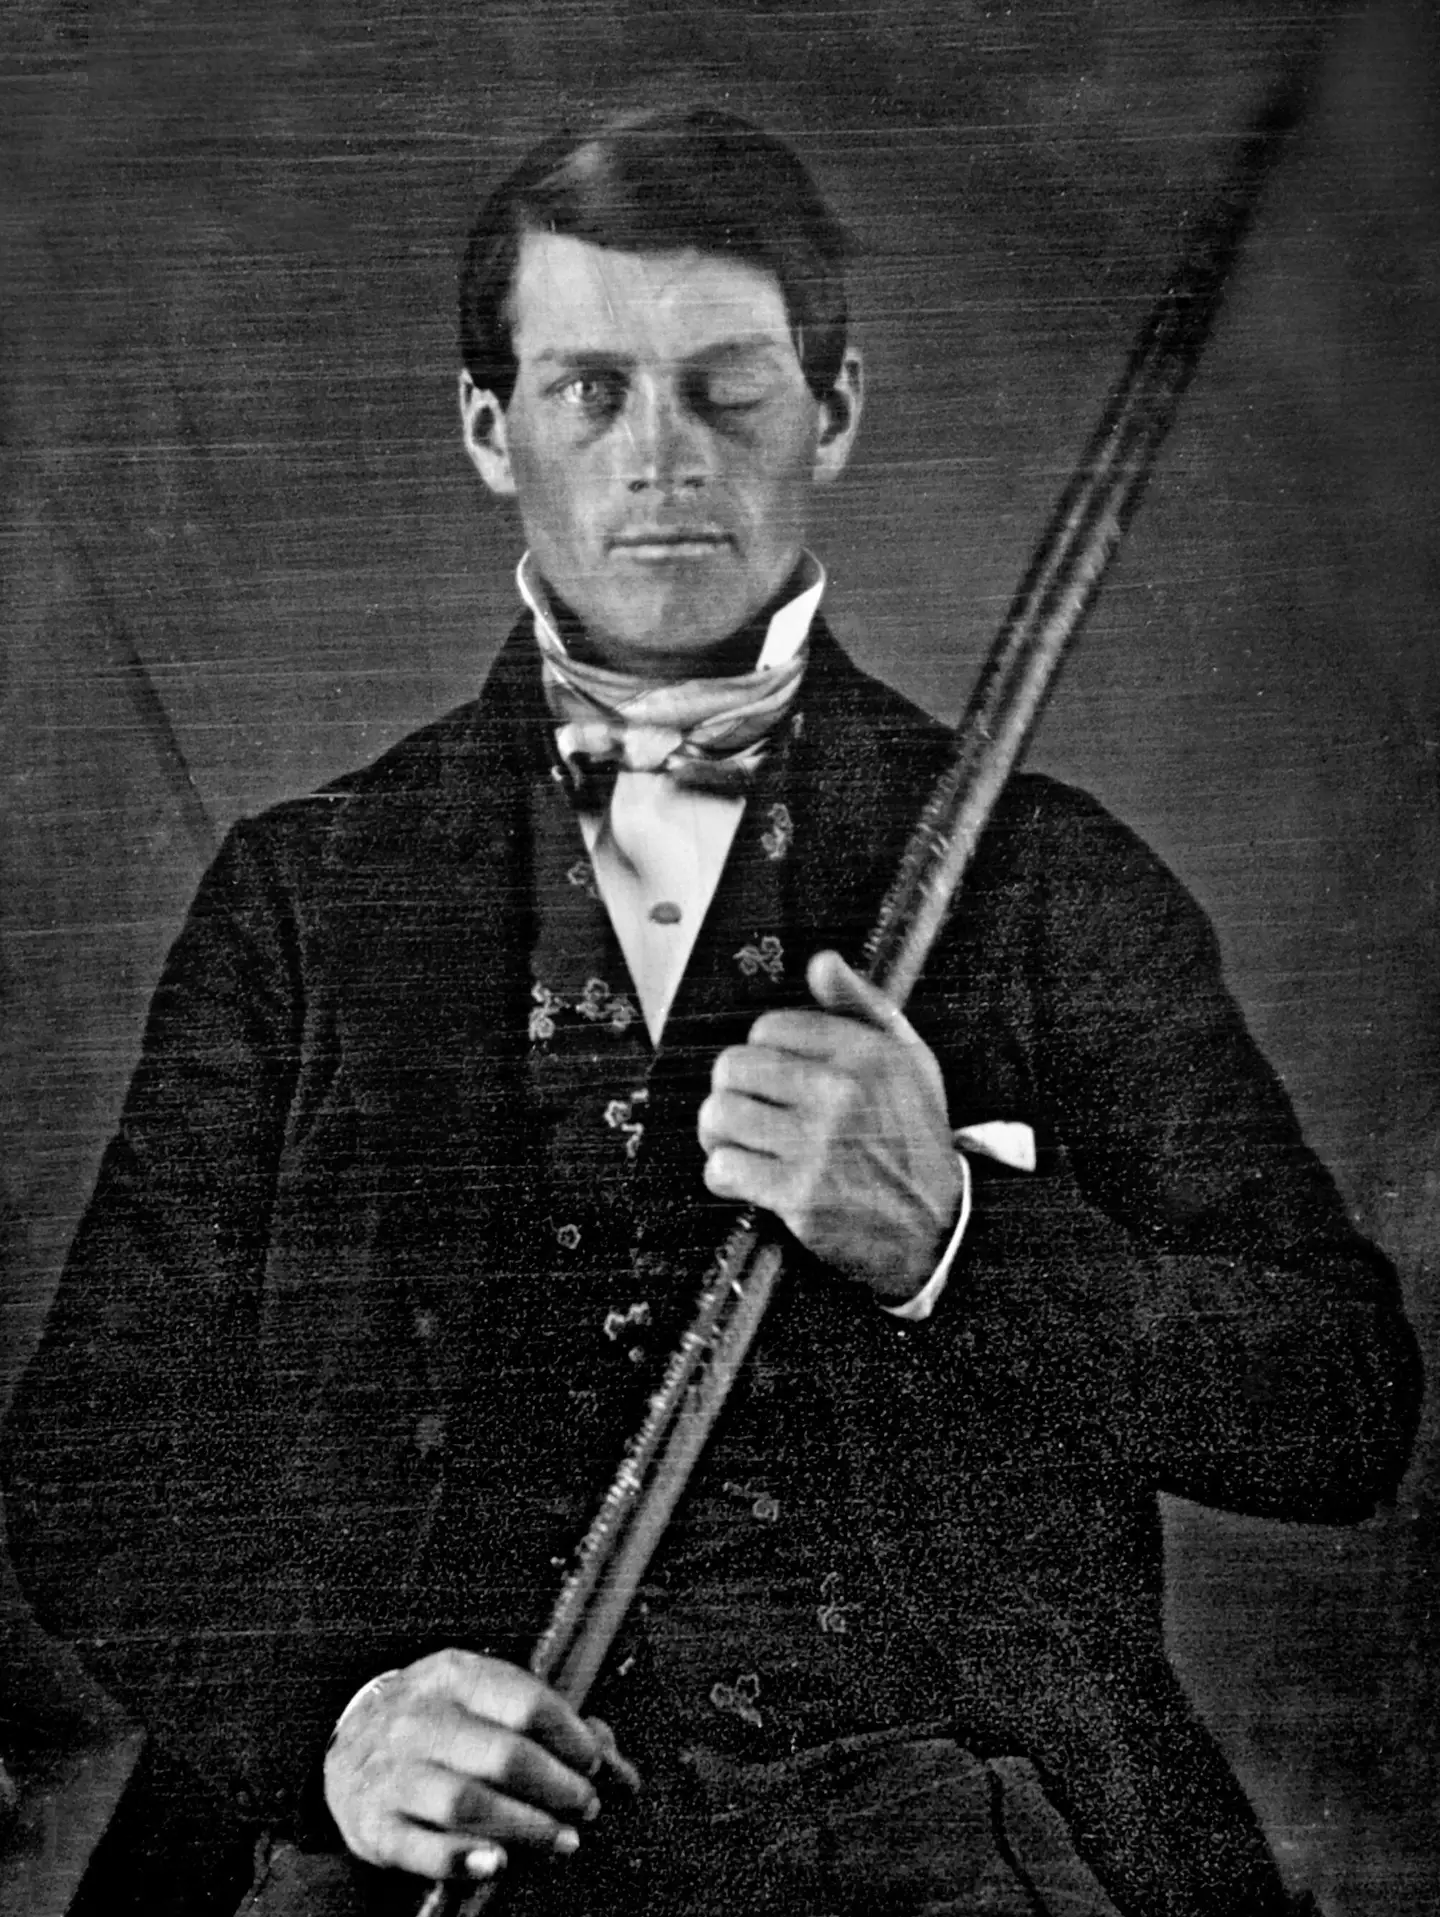 Phineas Gage was involved in a freak accident at work.